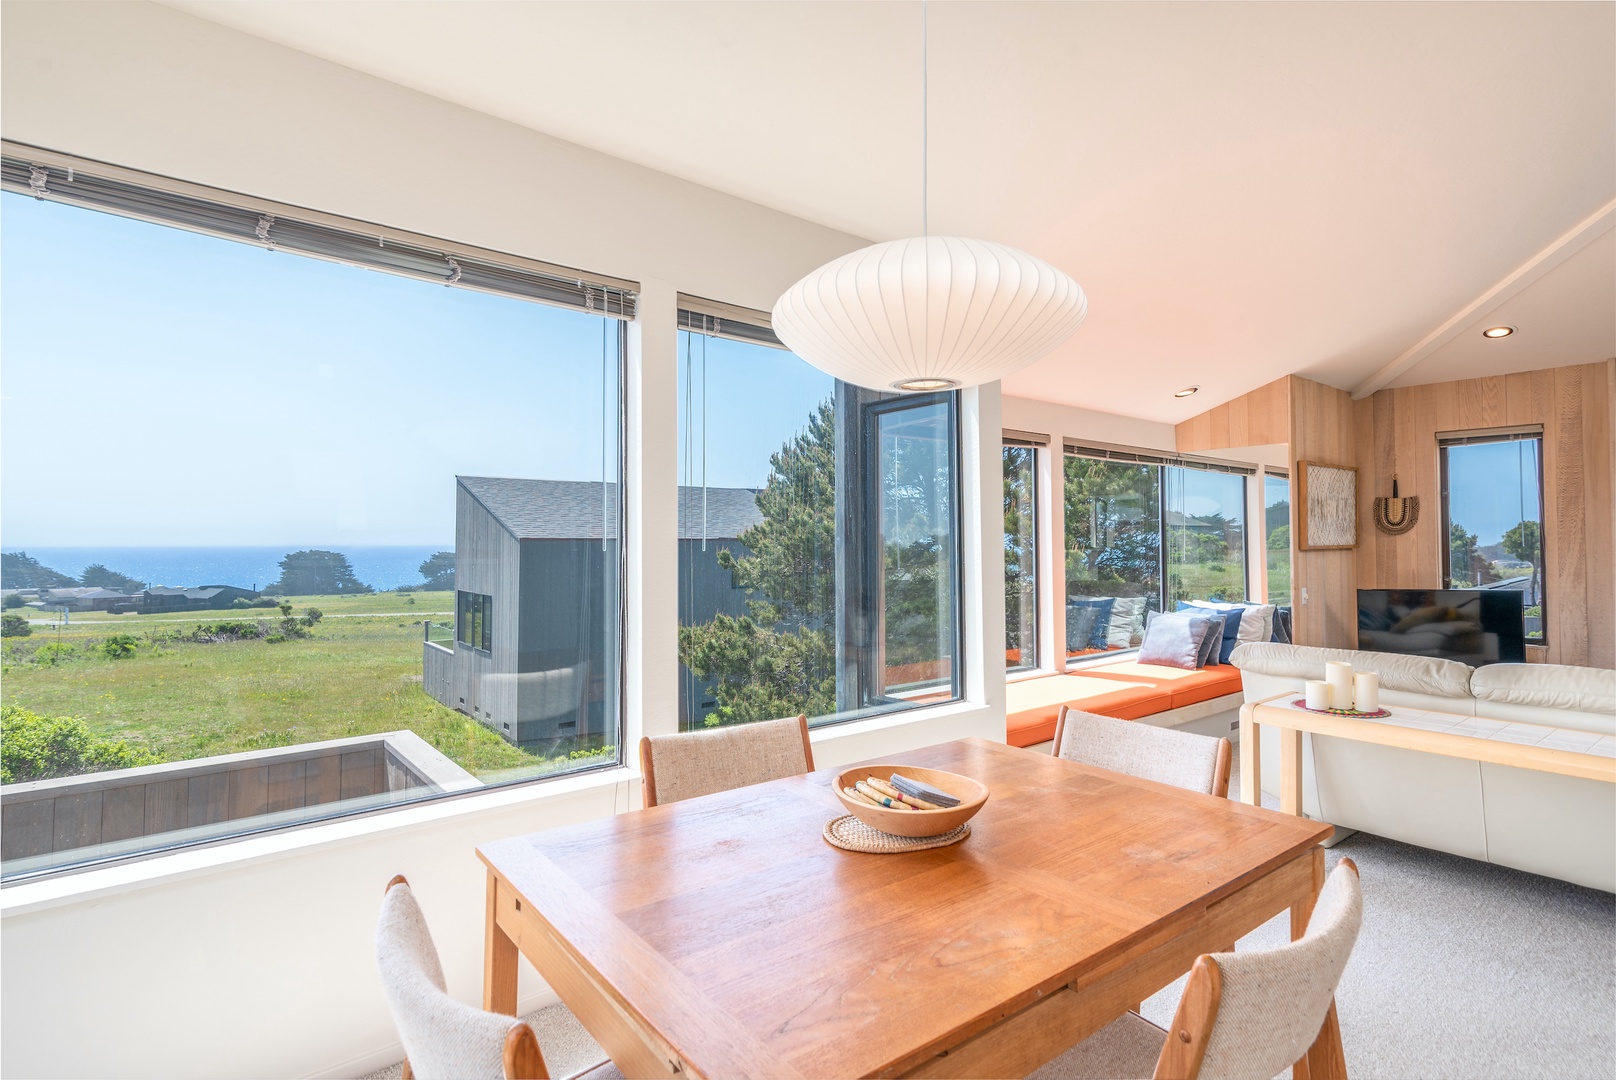 Dining table for 4 with ocean views